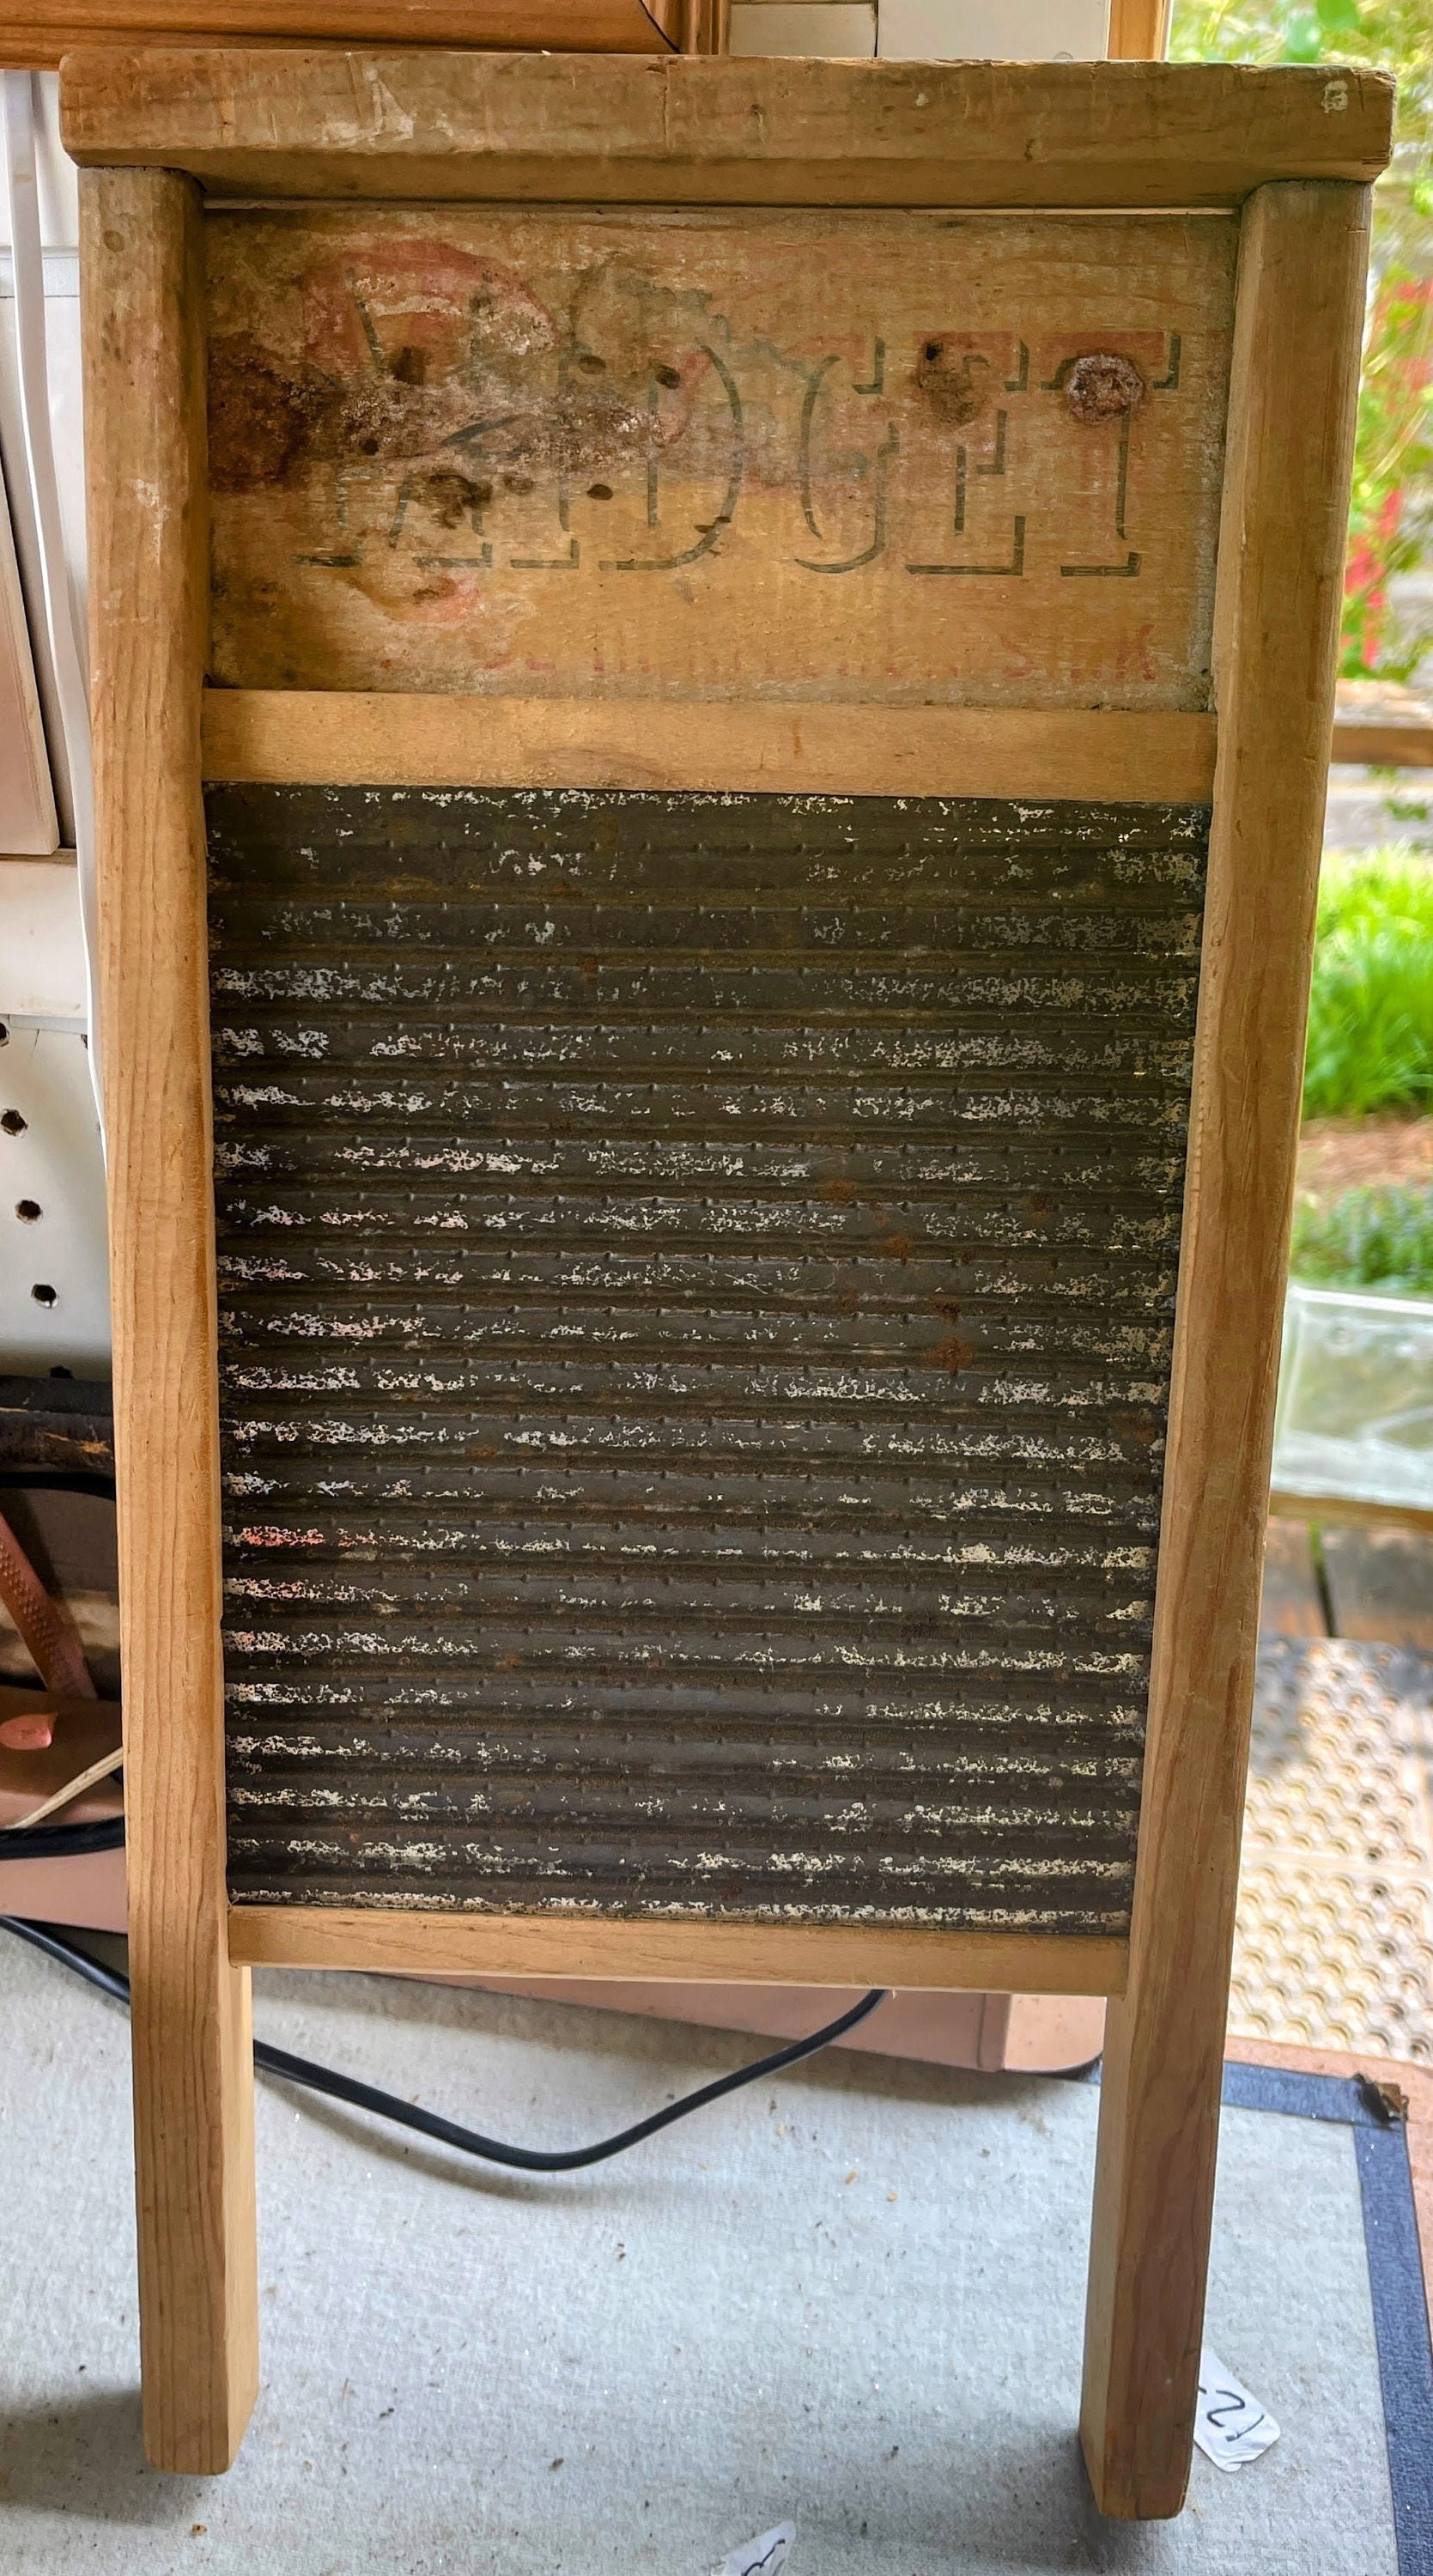 The Small Lil' Rusted Washboard